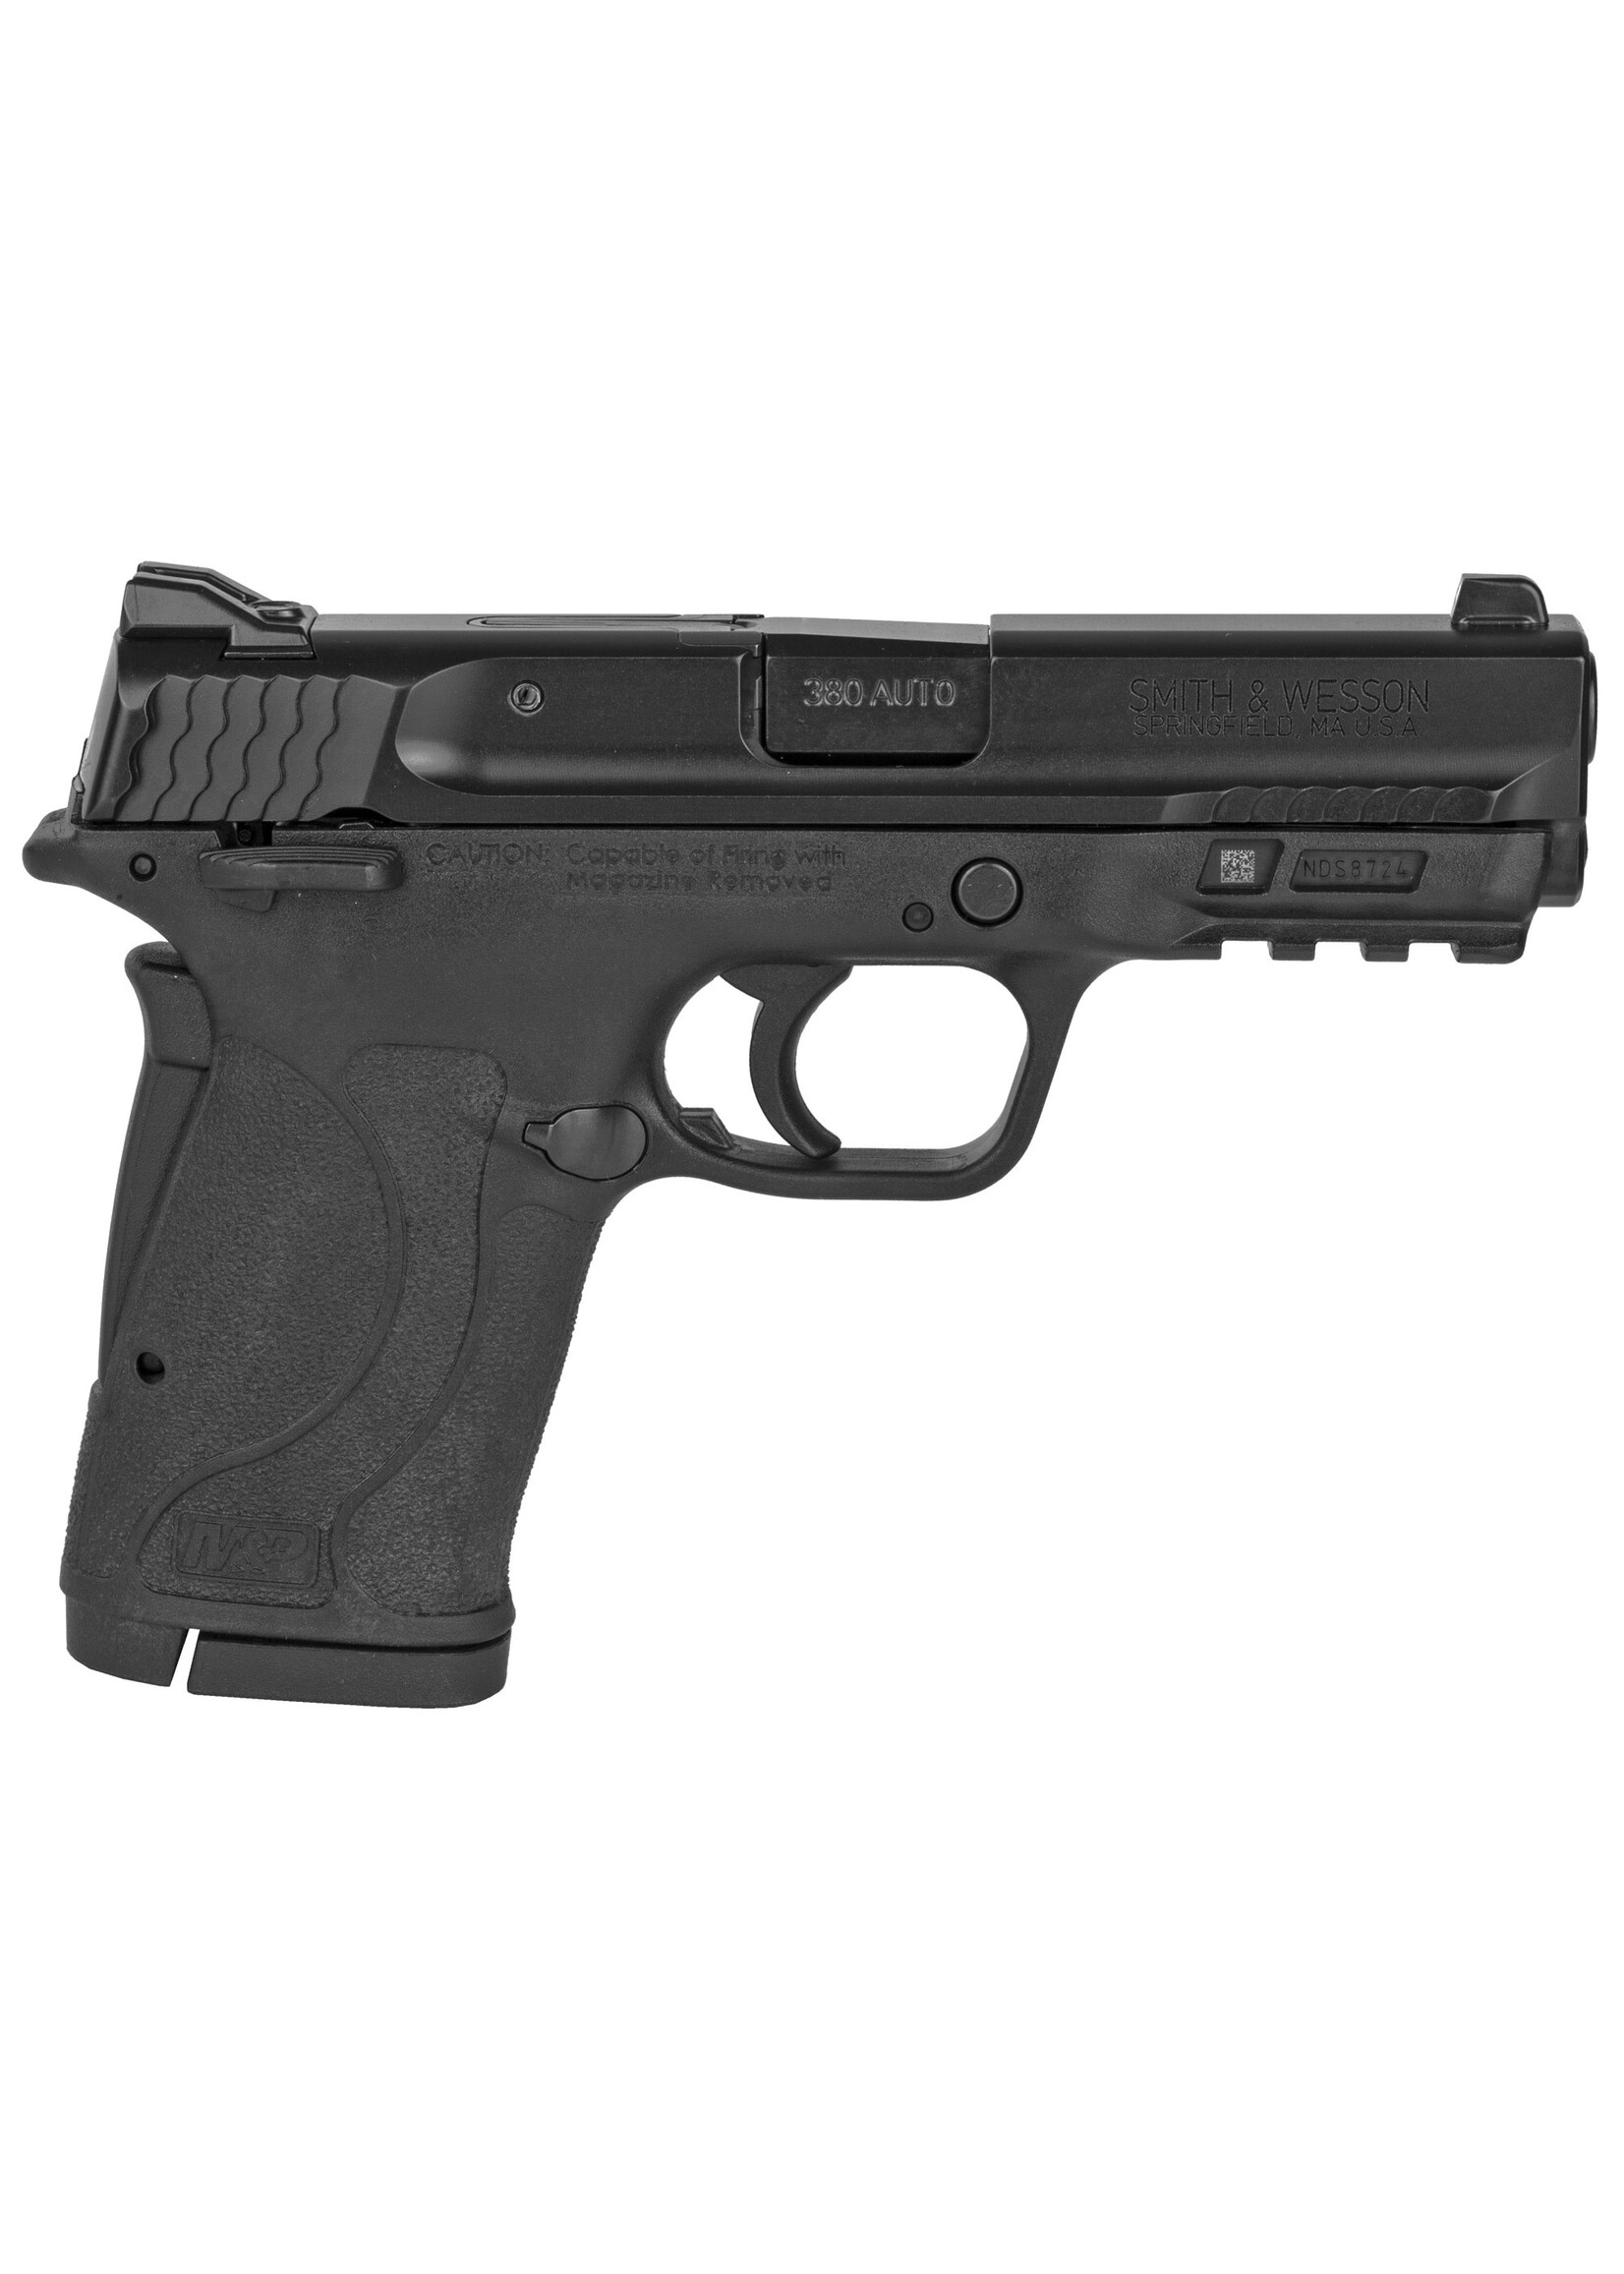 Smith and Wesson (S&W) Smith & Wesson 11663 M&P Shield EZ Compact Slim 380 ACP 8+1 3.67" Black Armornite Barrel & Serrated Slide, Matte Black Polymer Frame w/Picatinny Rail, Black Polymer Grips Right Hand